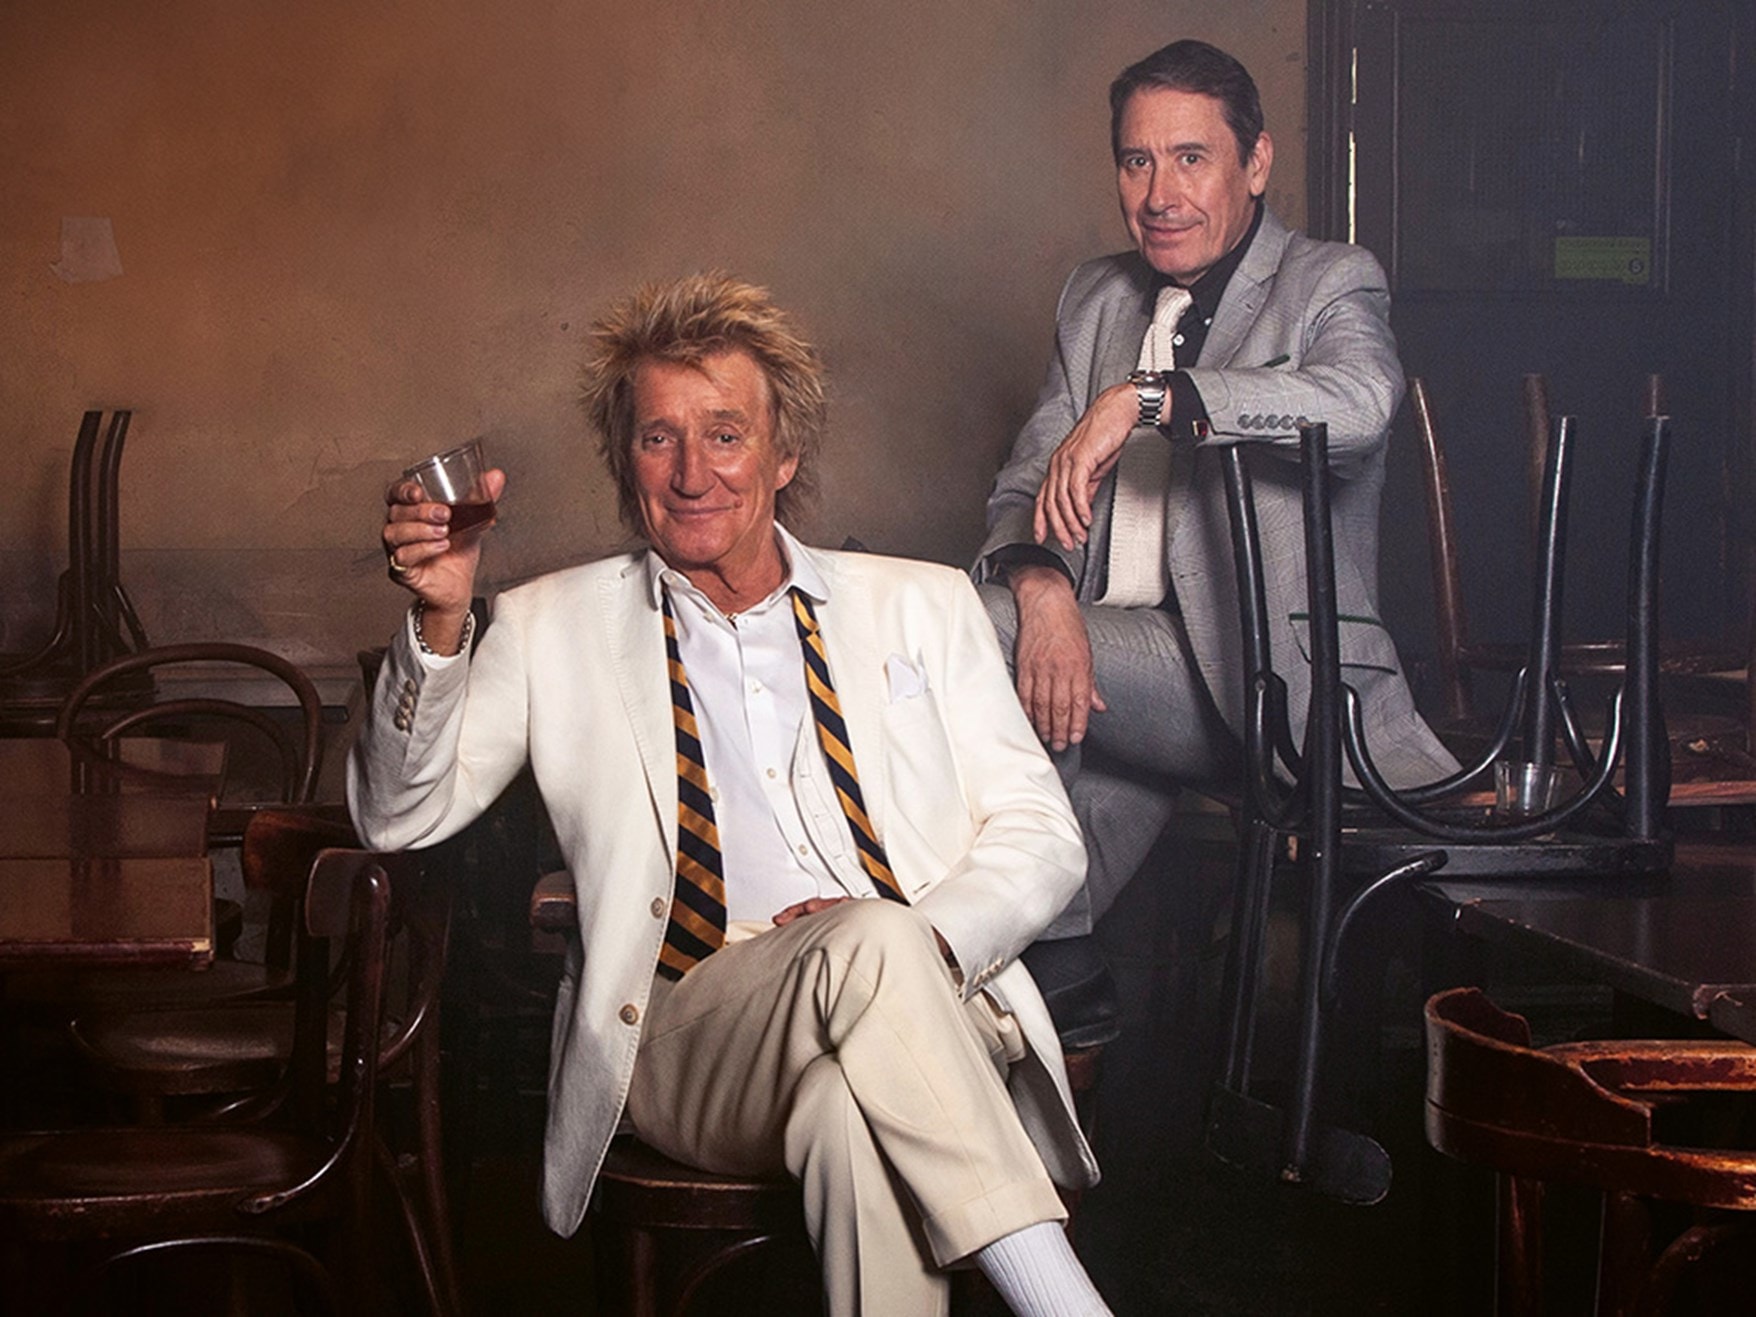 Meet Rod Stewart & Jools Holland for an exclusive album signing event